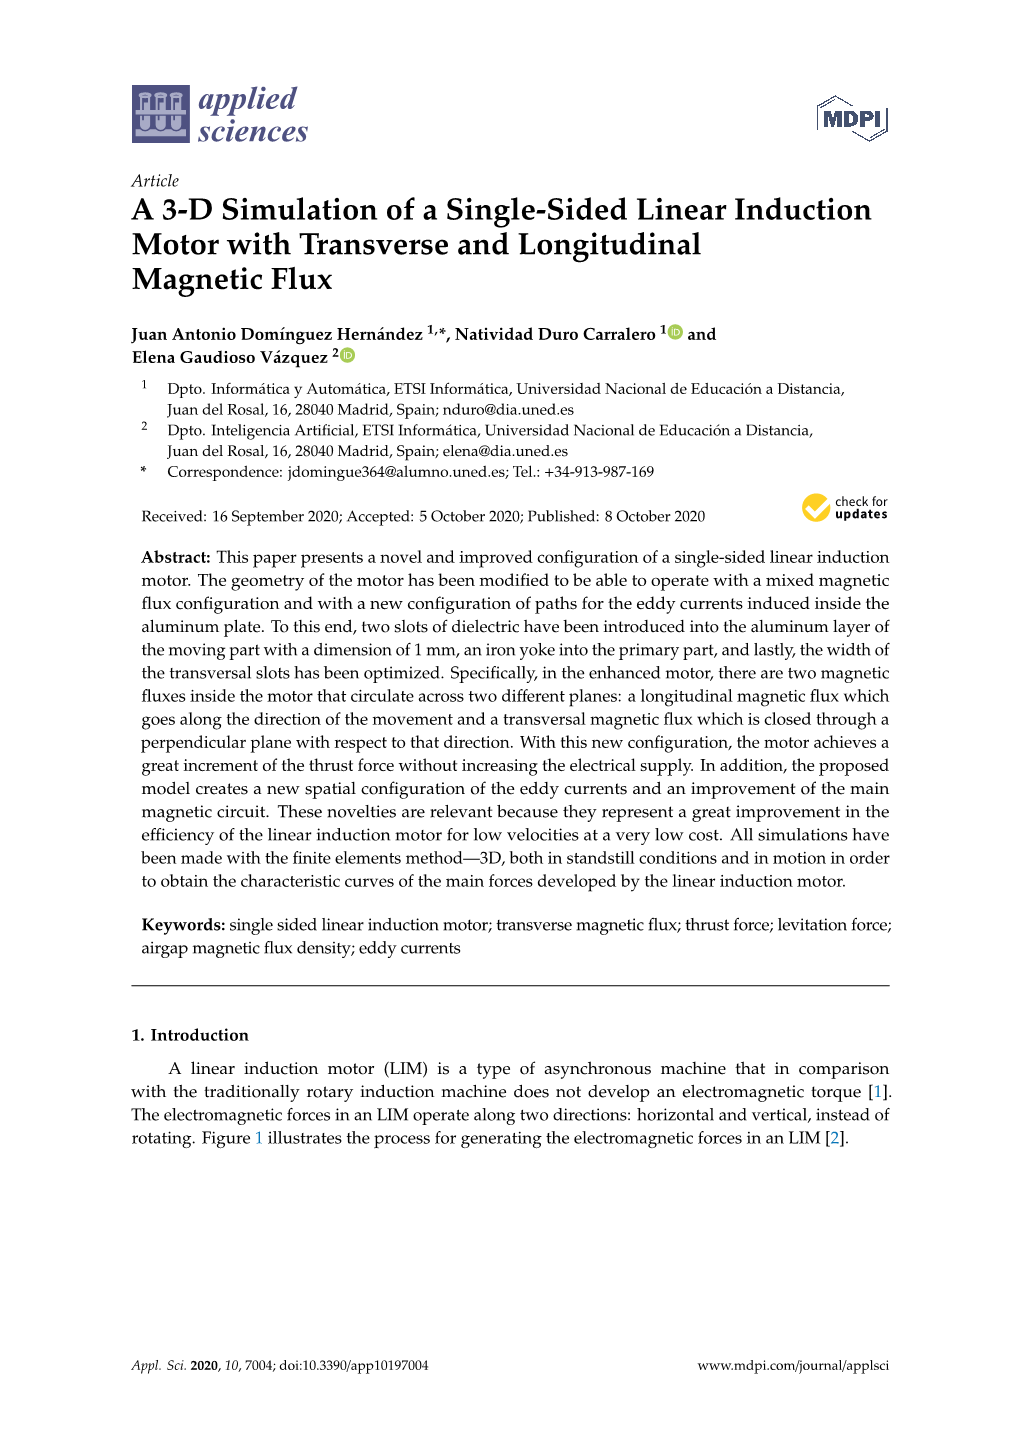 A 3-D Simulation of a Single-Sided Linear Induction Motor with Transverse and Longitudinal Magnetic Flux